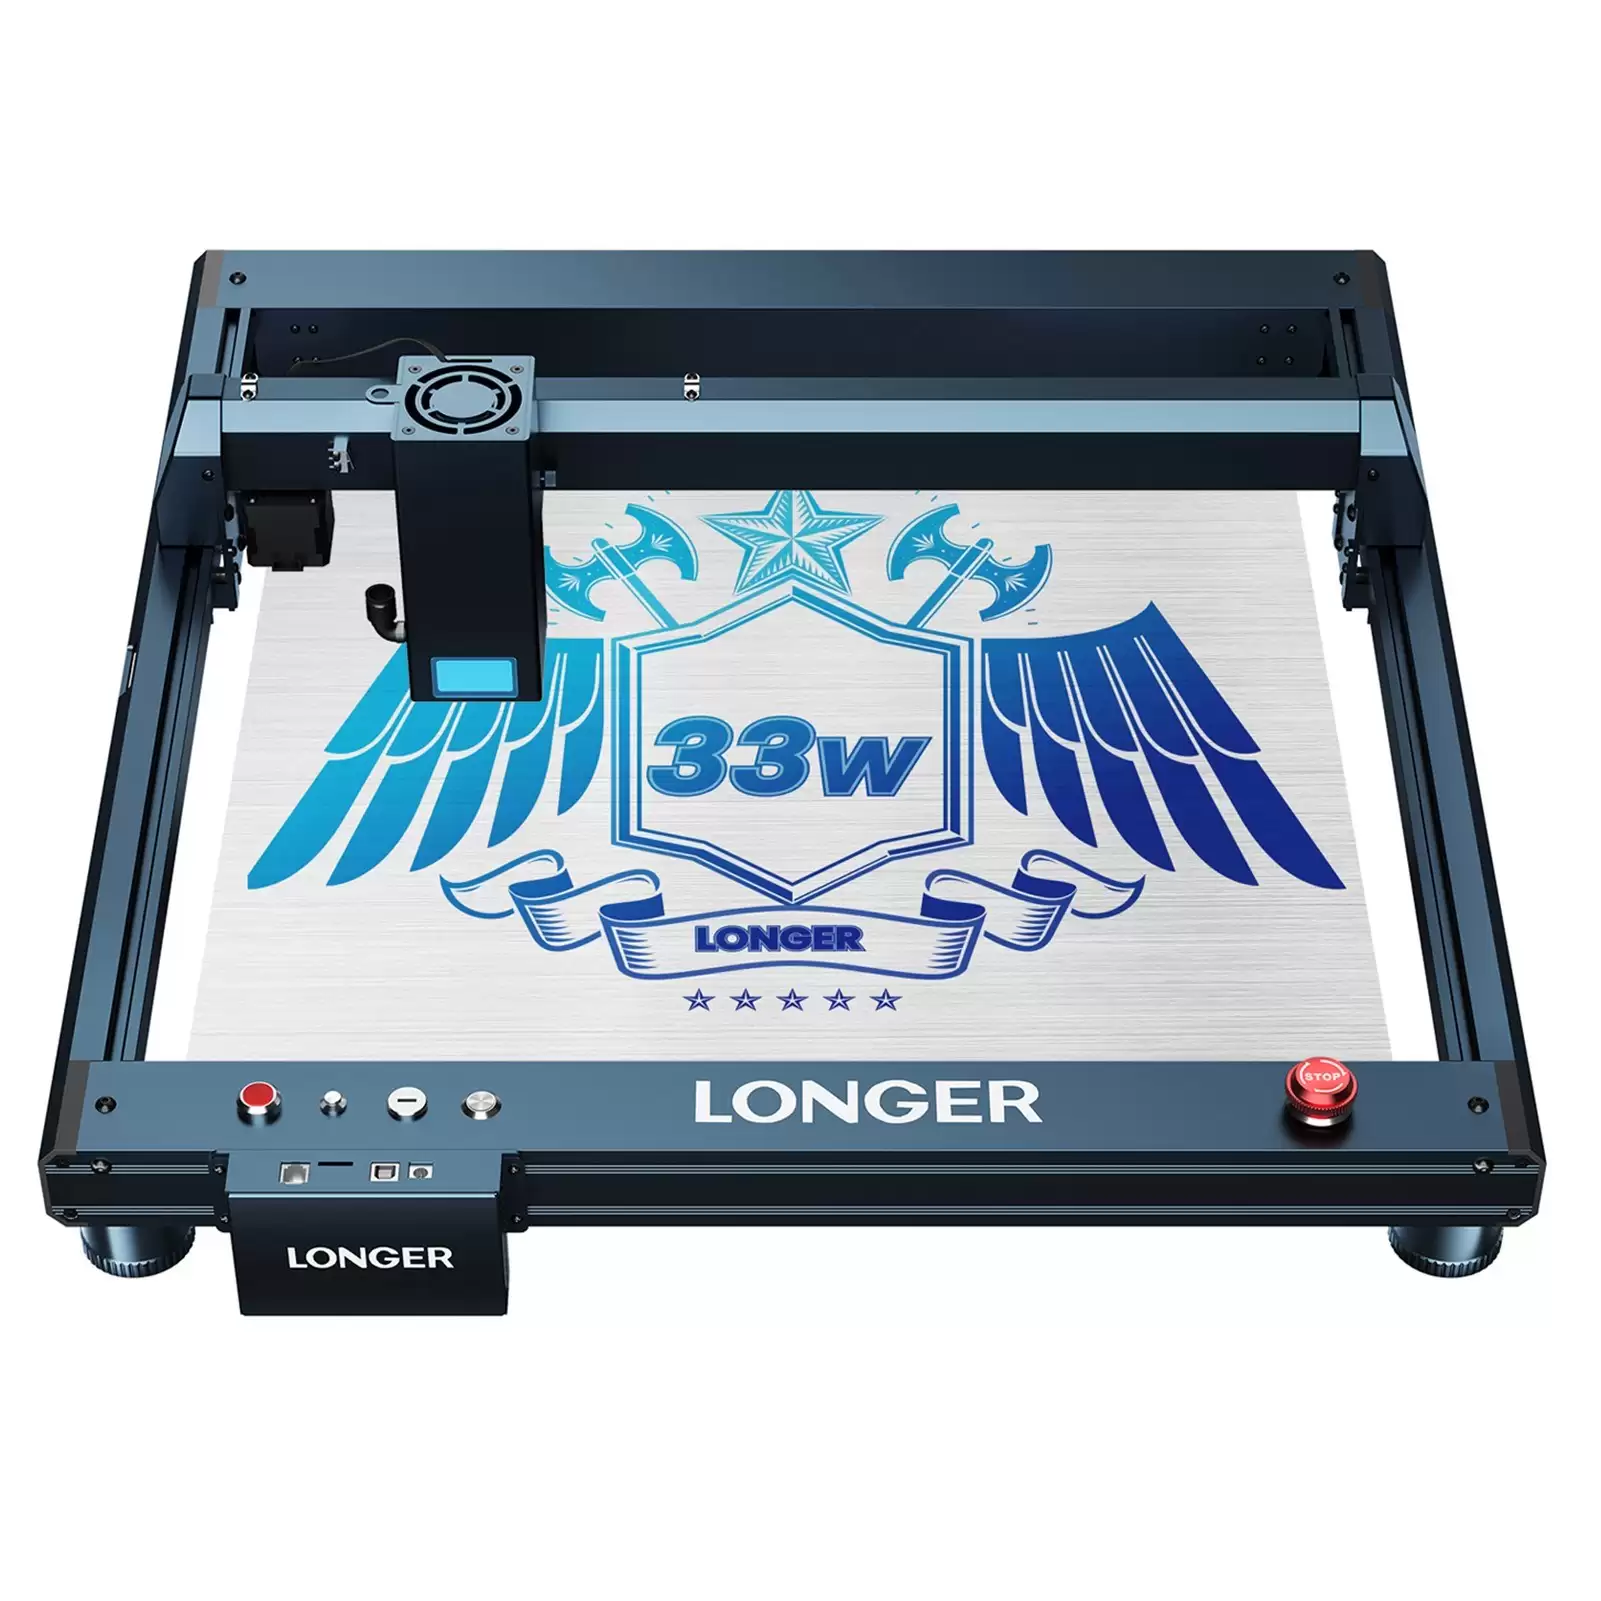 Pay Only $723 For Longer Laser B1 30w Laser Engraver 36w Laser Power With This Discount Coupon At Cafago